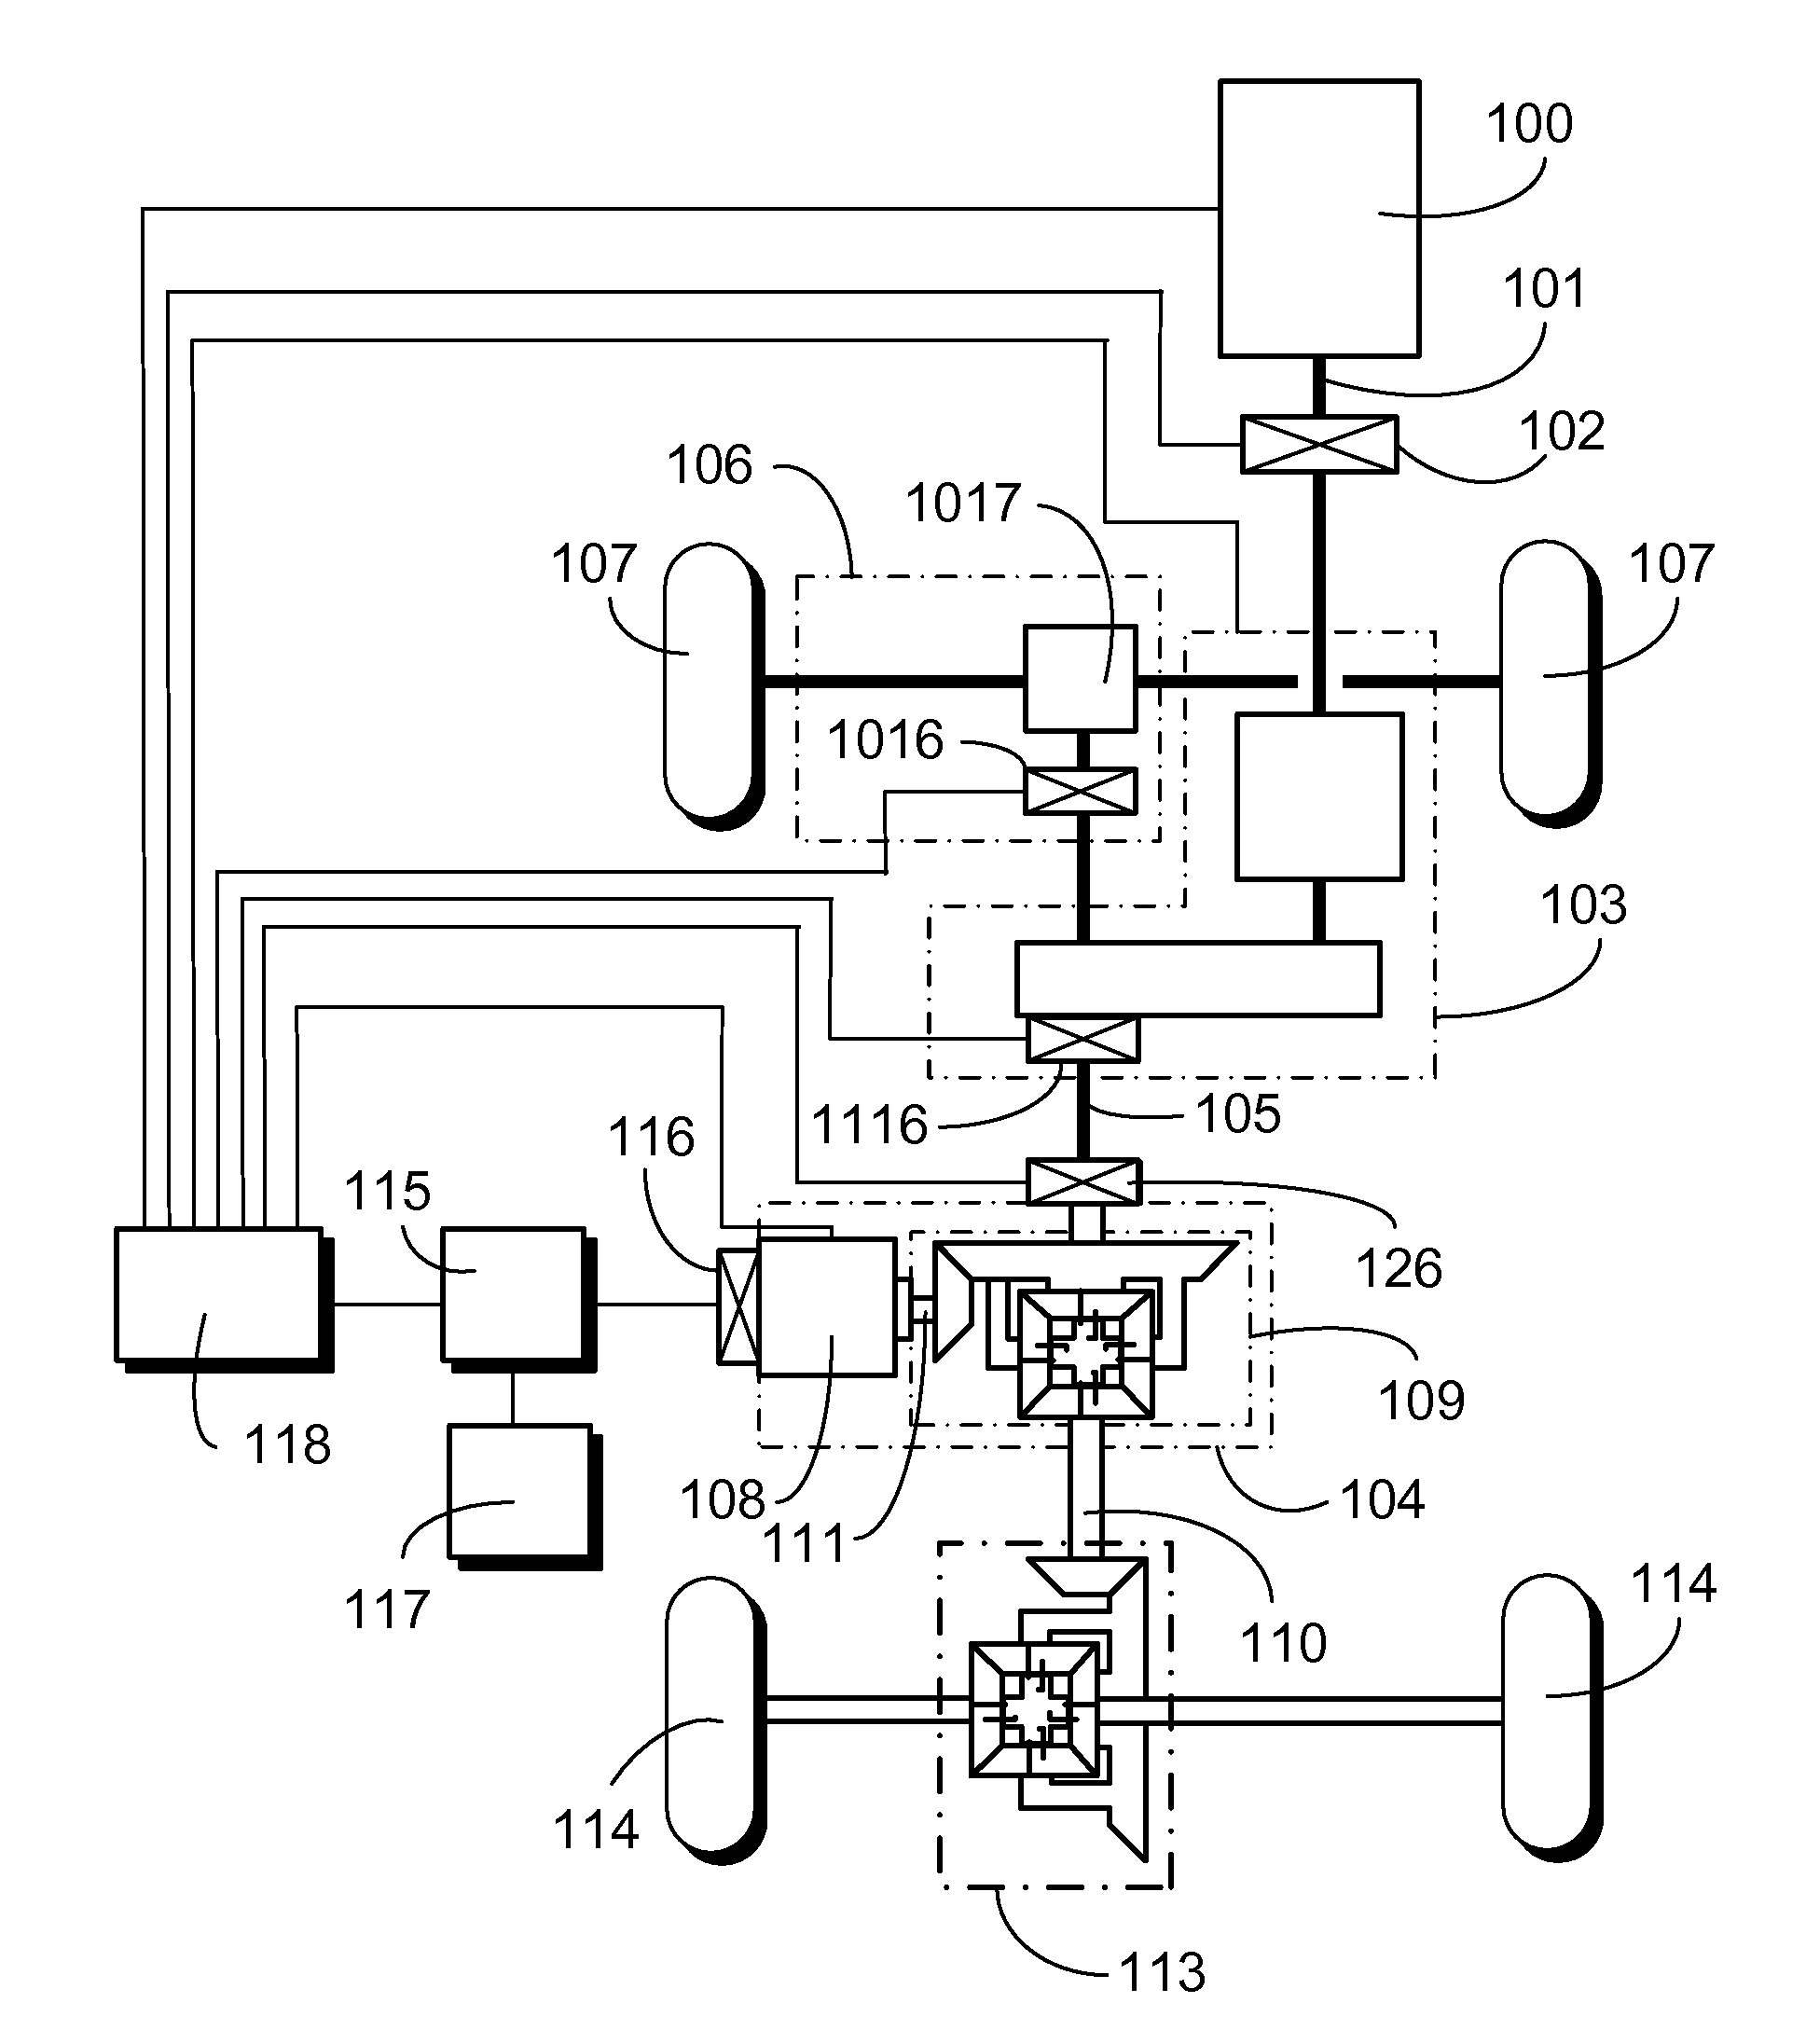 Energy storage type of differential hybrid power distribution system